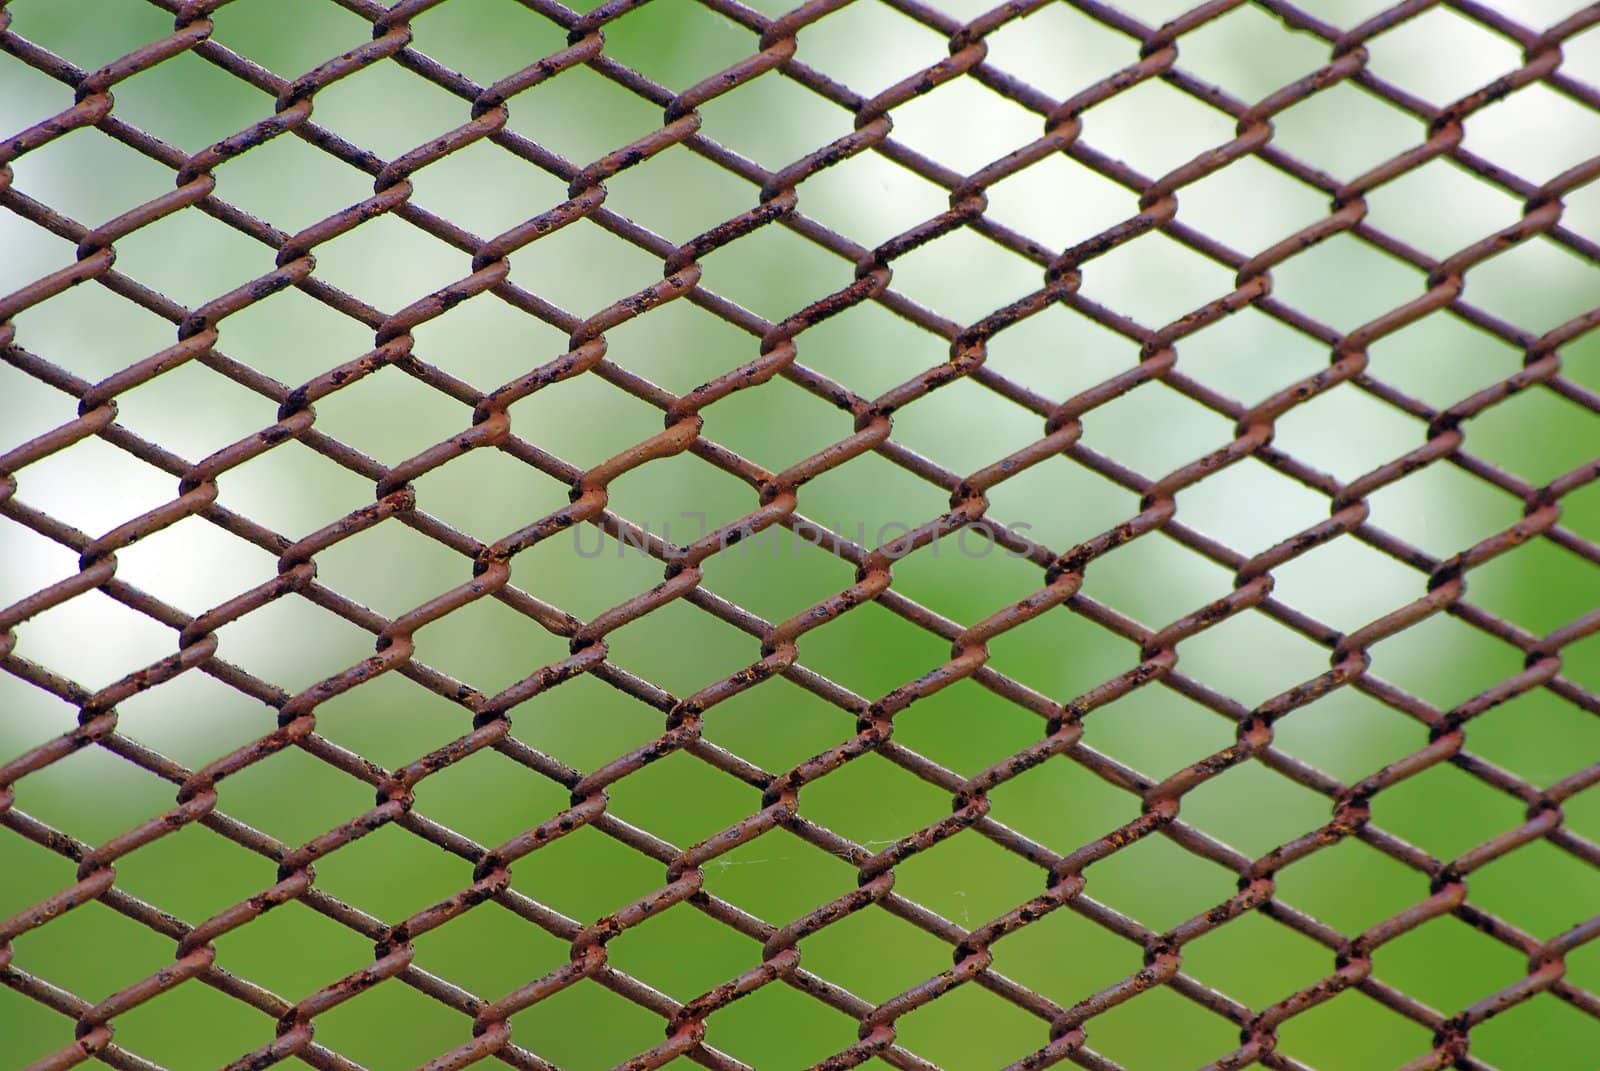 Chain link rusty fence on a green foliage background